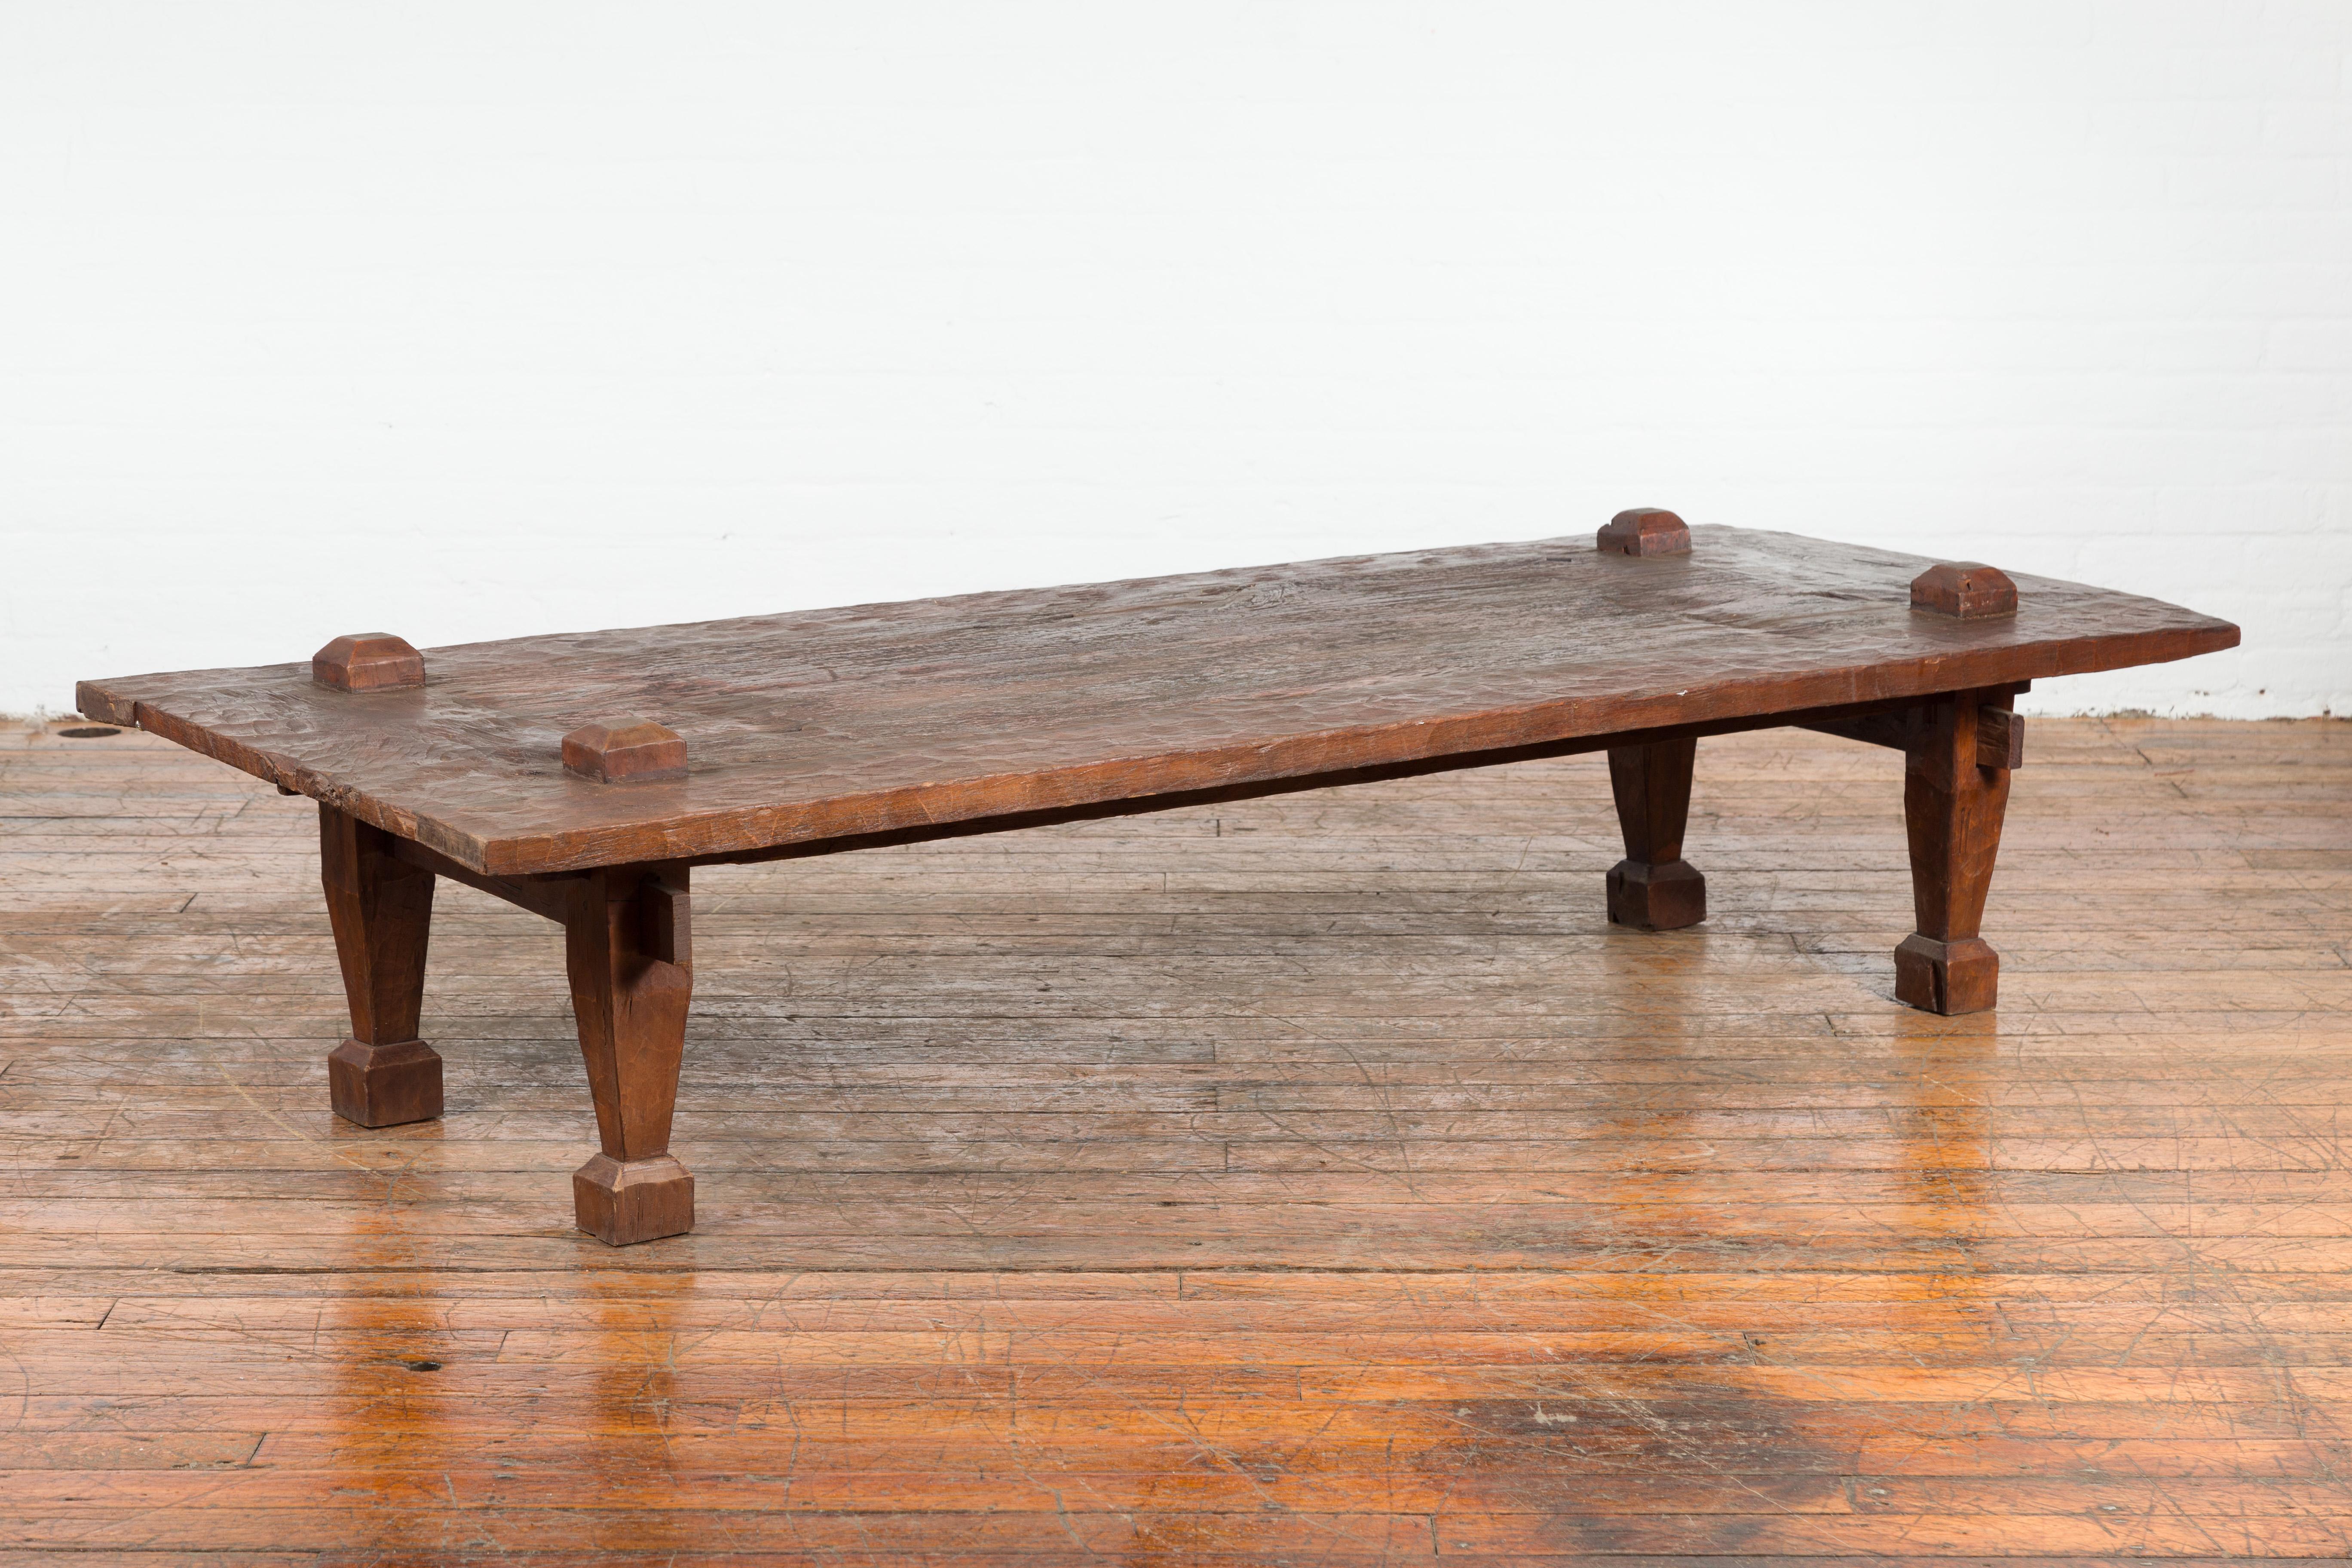 An antique rustic Indonesian coffee table from the 19th century, with raised joints and distressed patina. Created in Indonesia during the 19th century, this large coffee table features a rustic rectangular top with raised joints, sitting above four